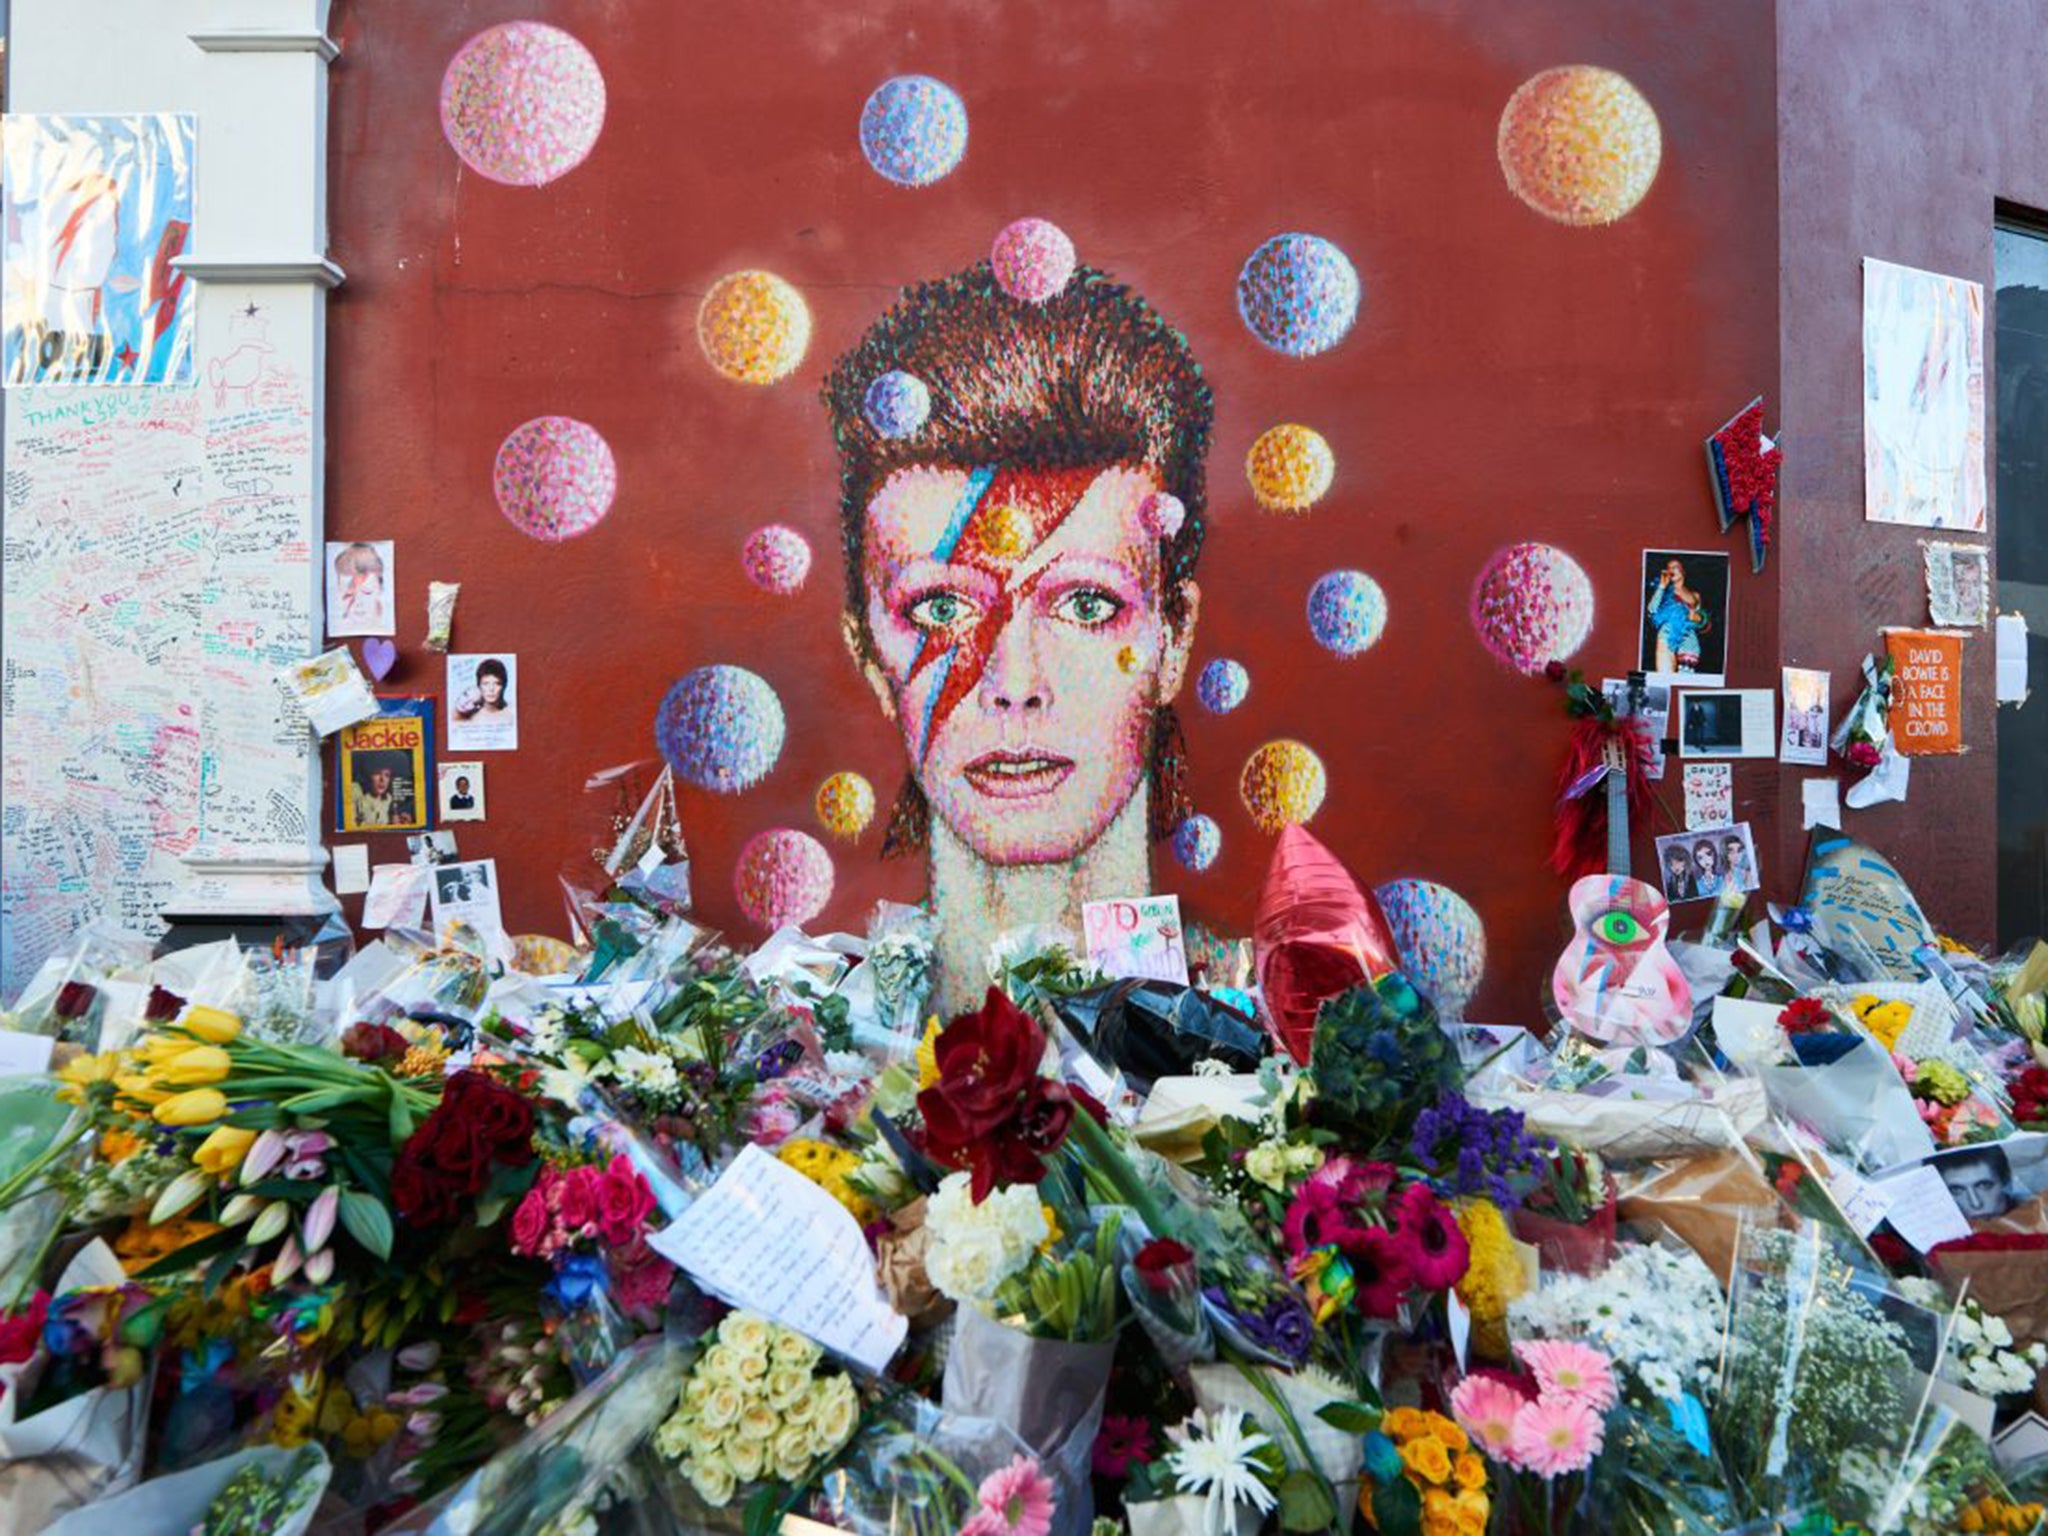 The Bowie mural in Brixton